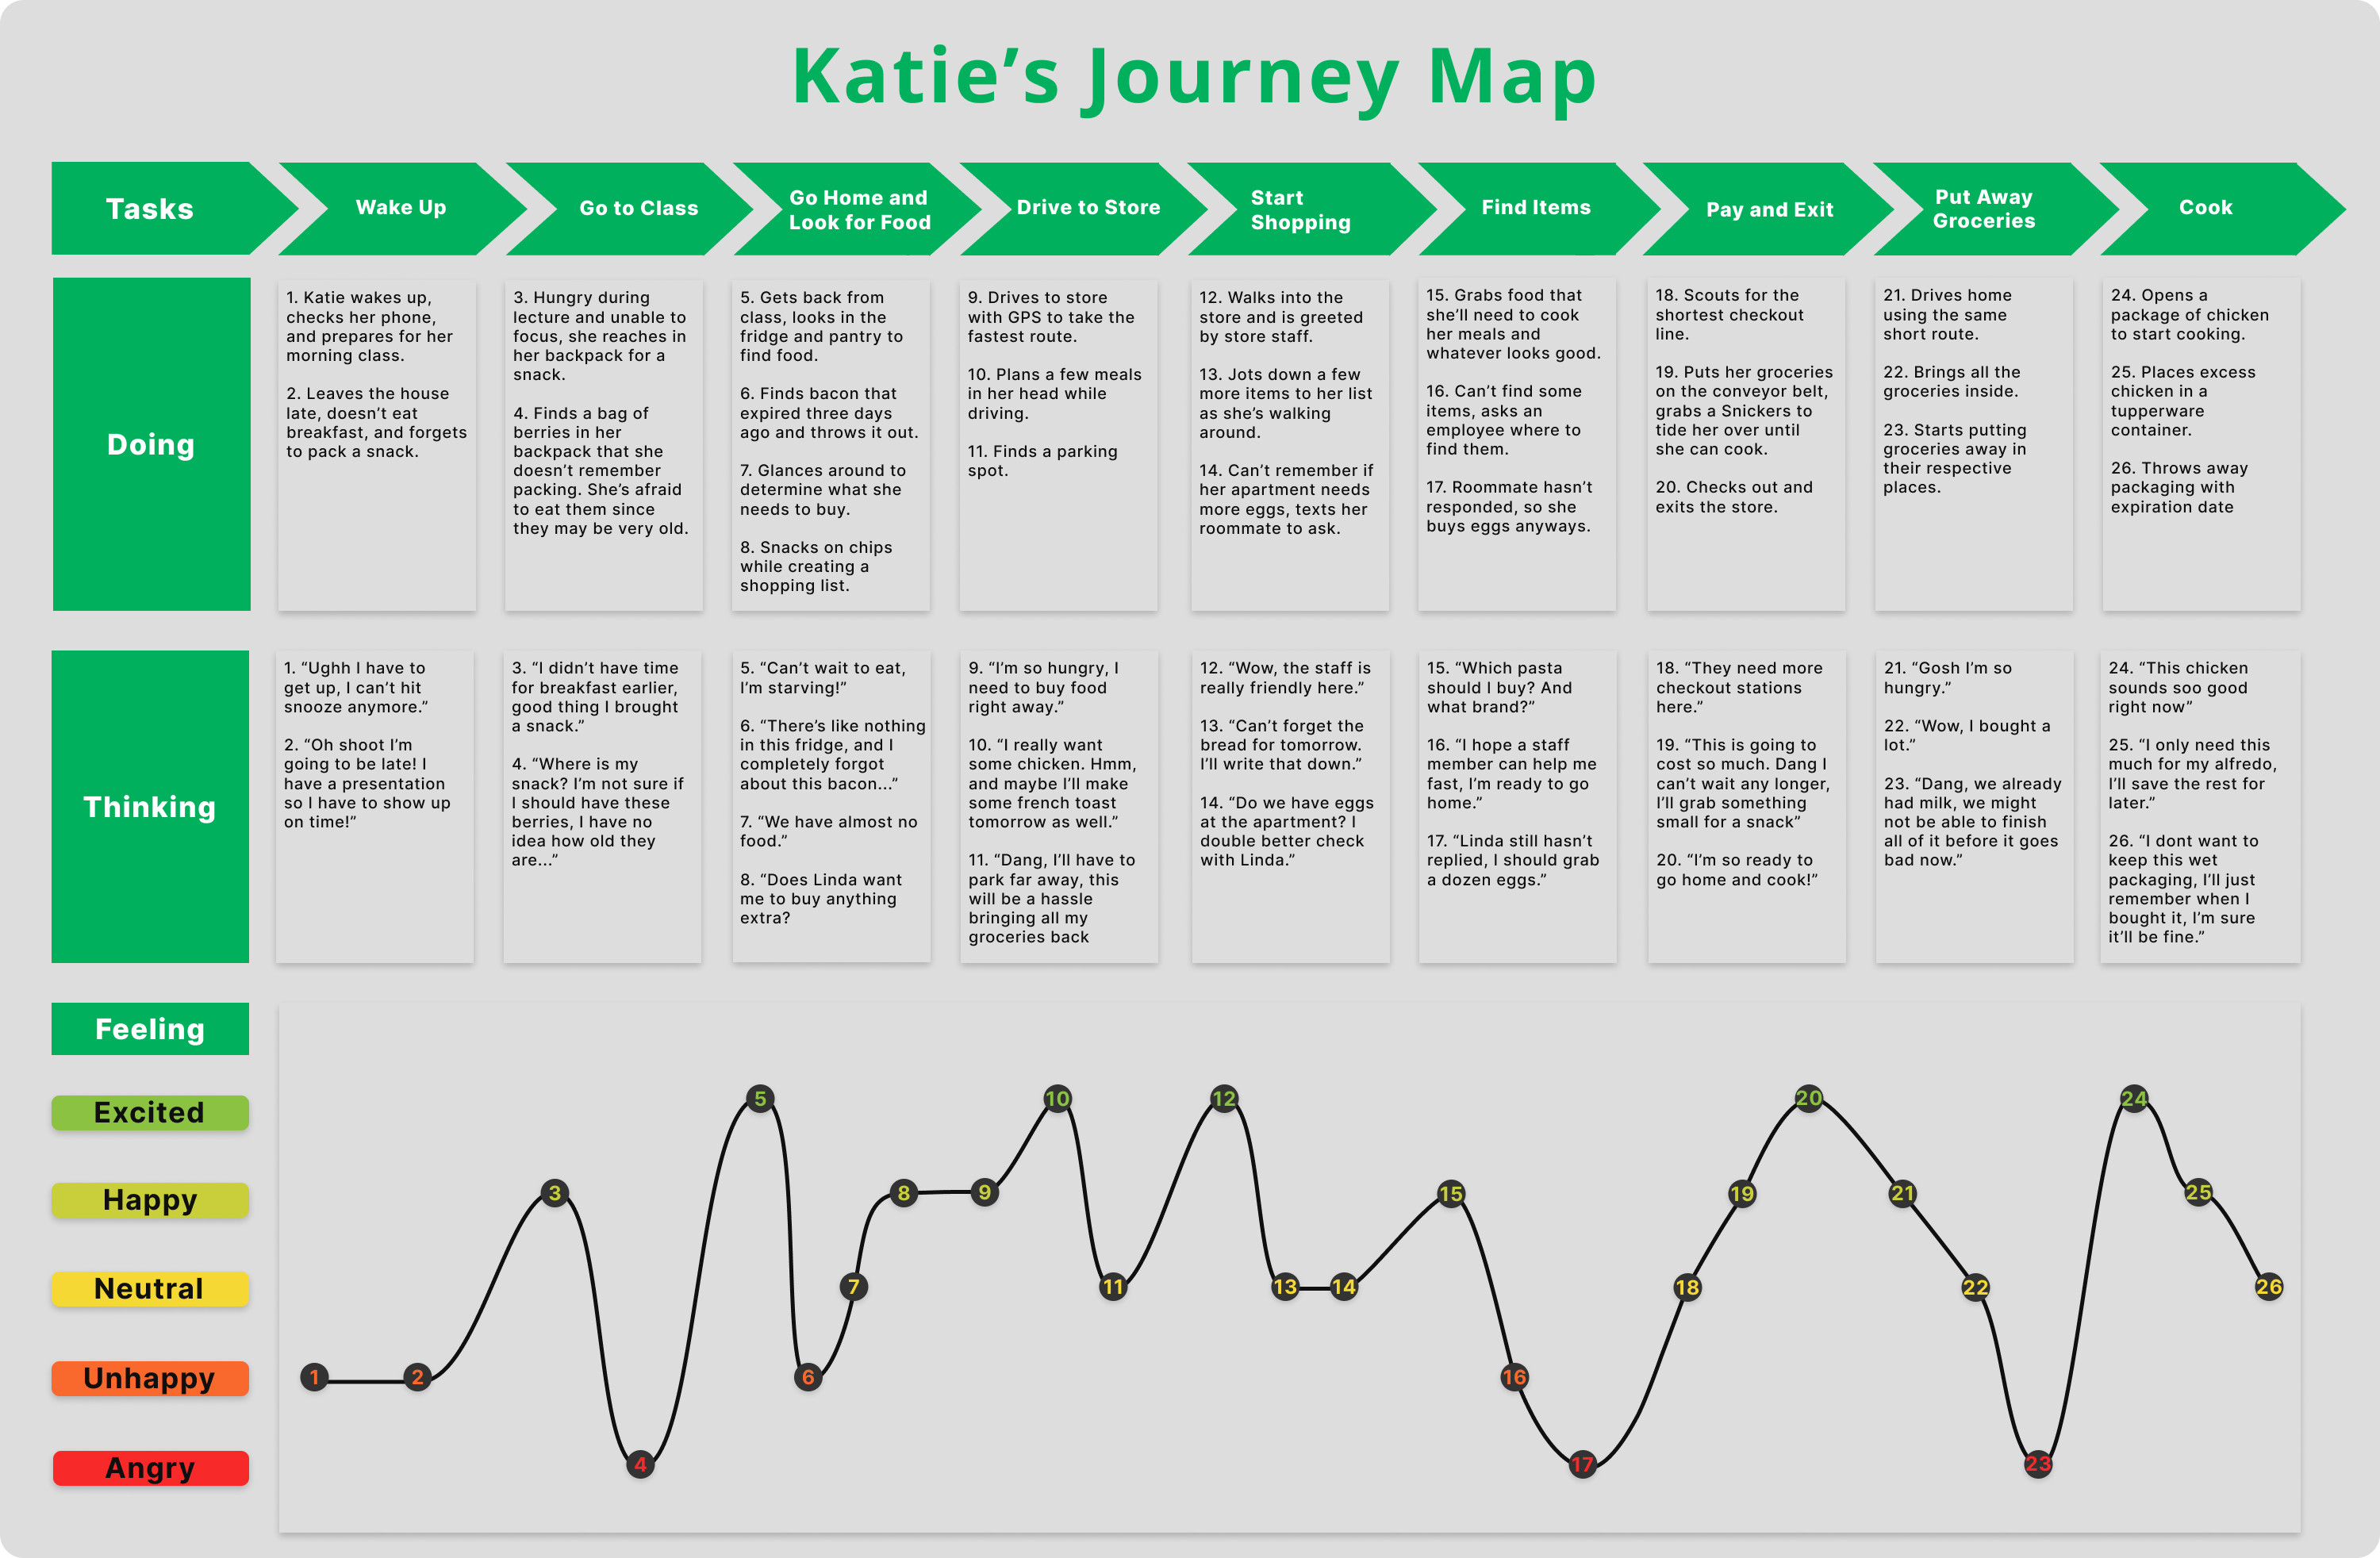 user journey map for Katie in a day